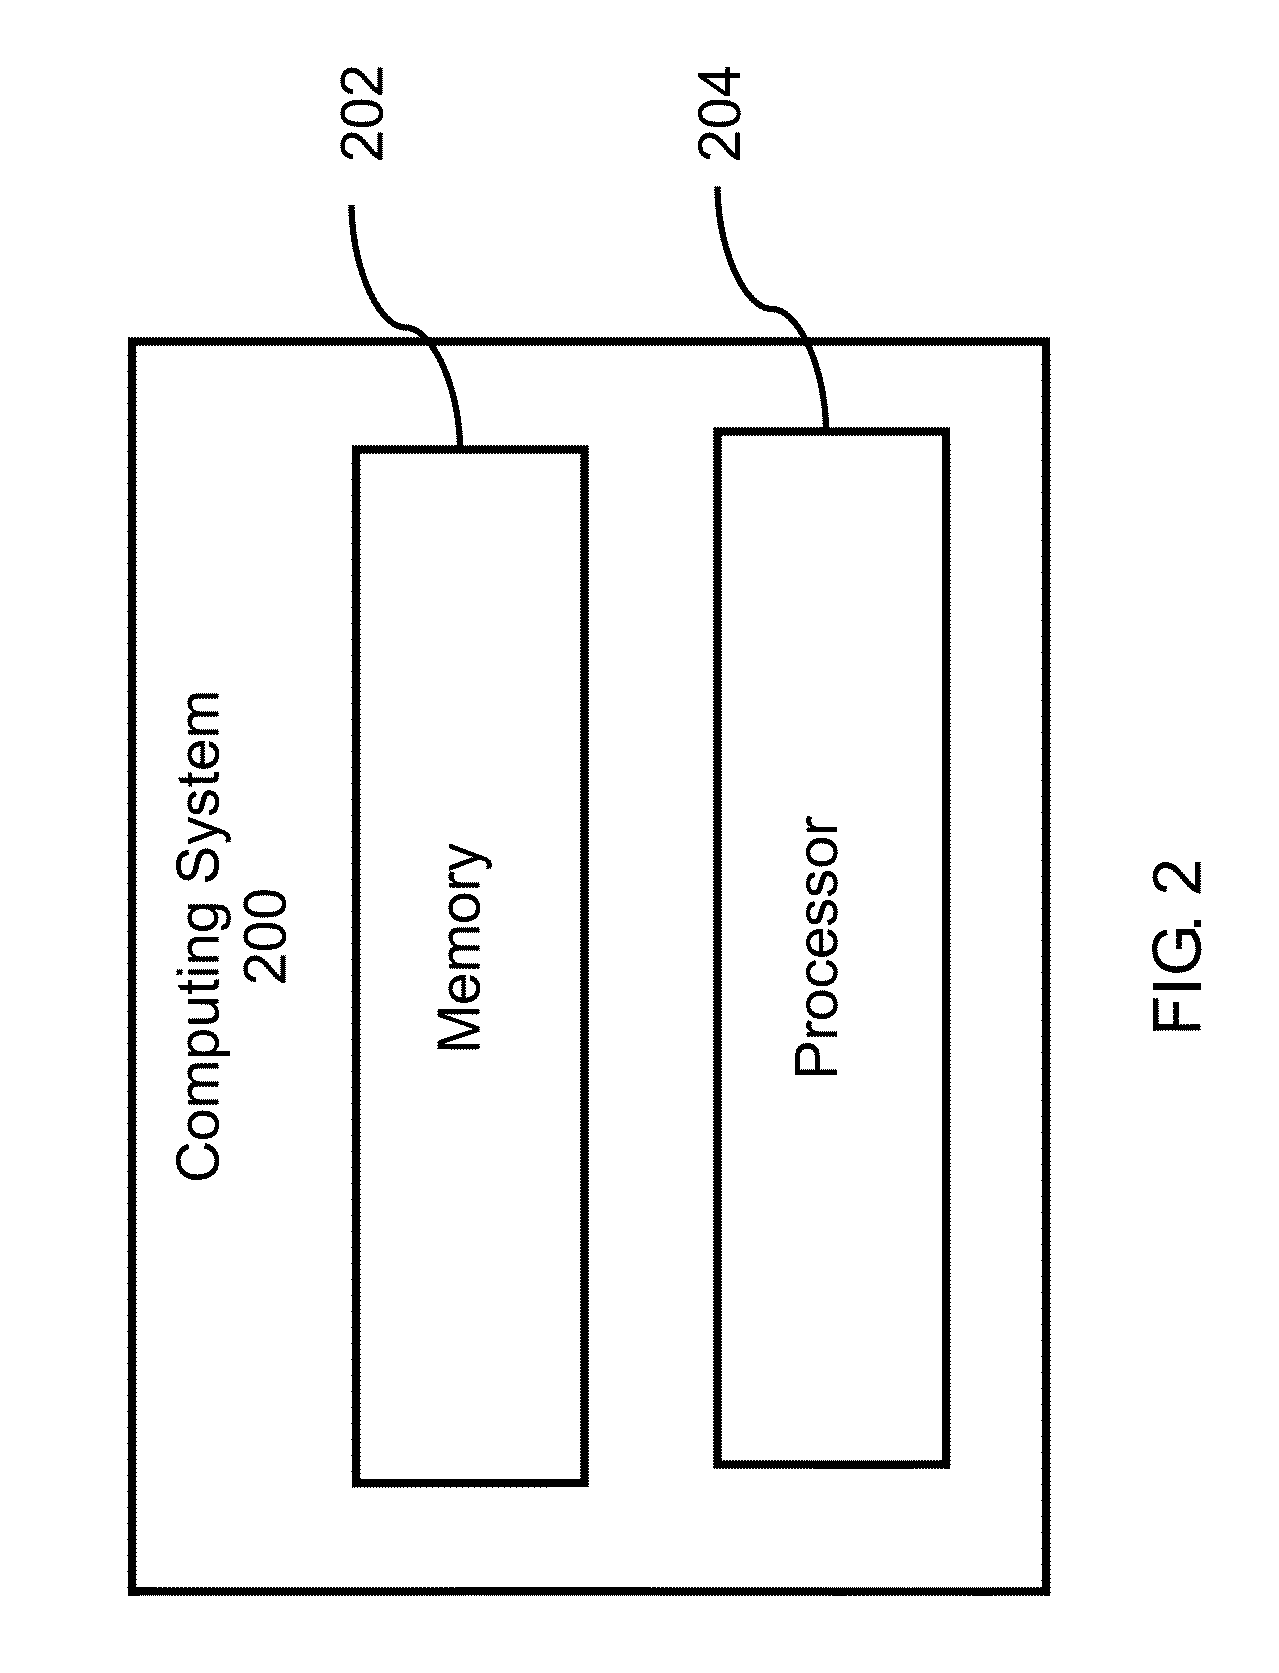 Systems and methods for managing an infrastructure using a virtual modeling platform